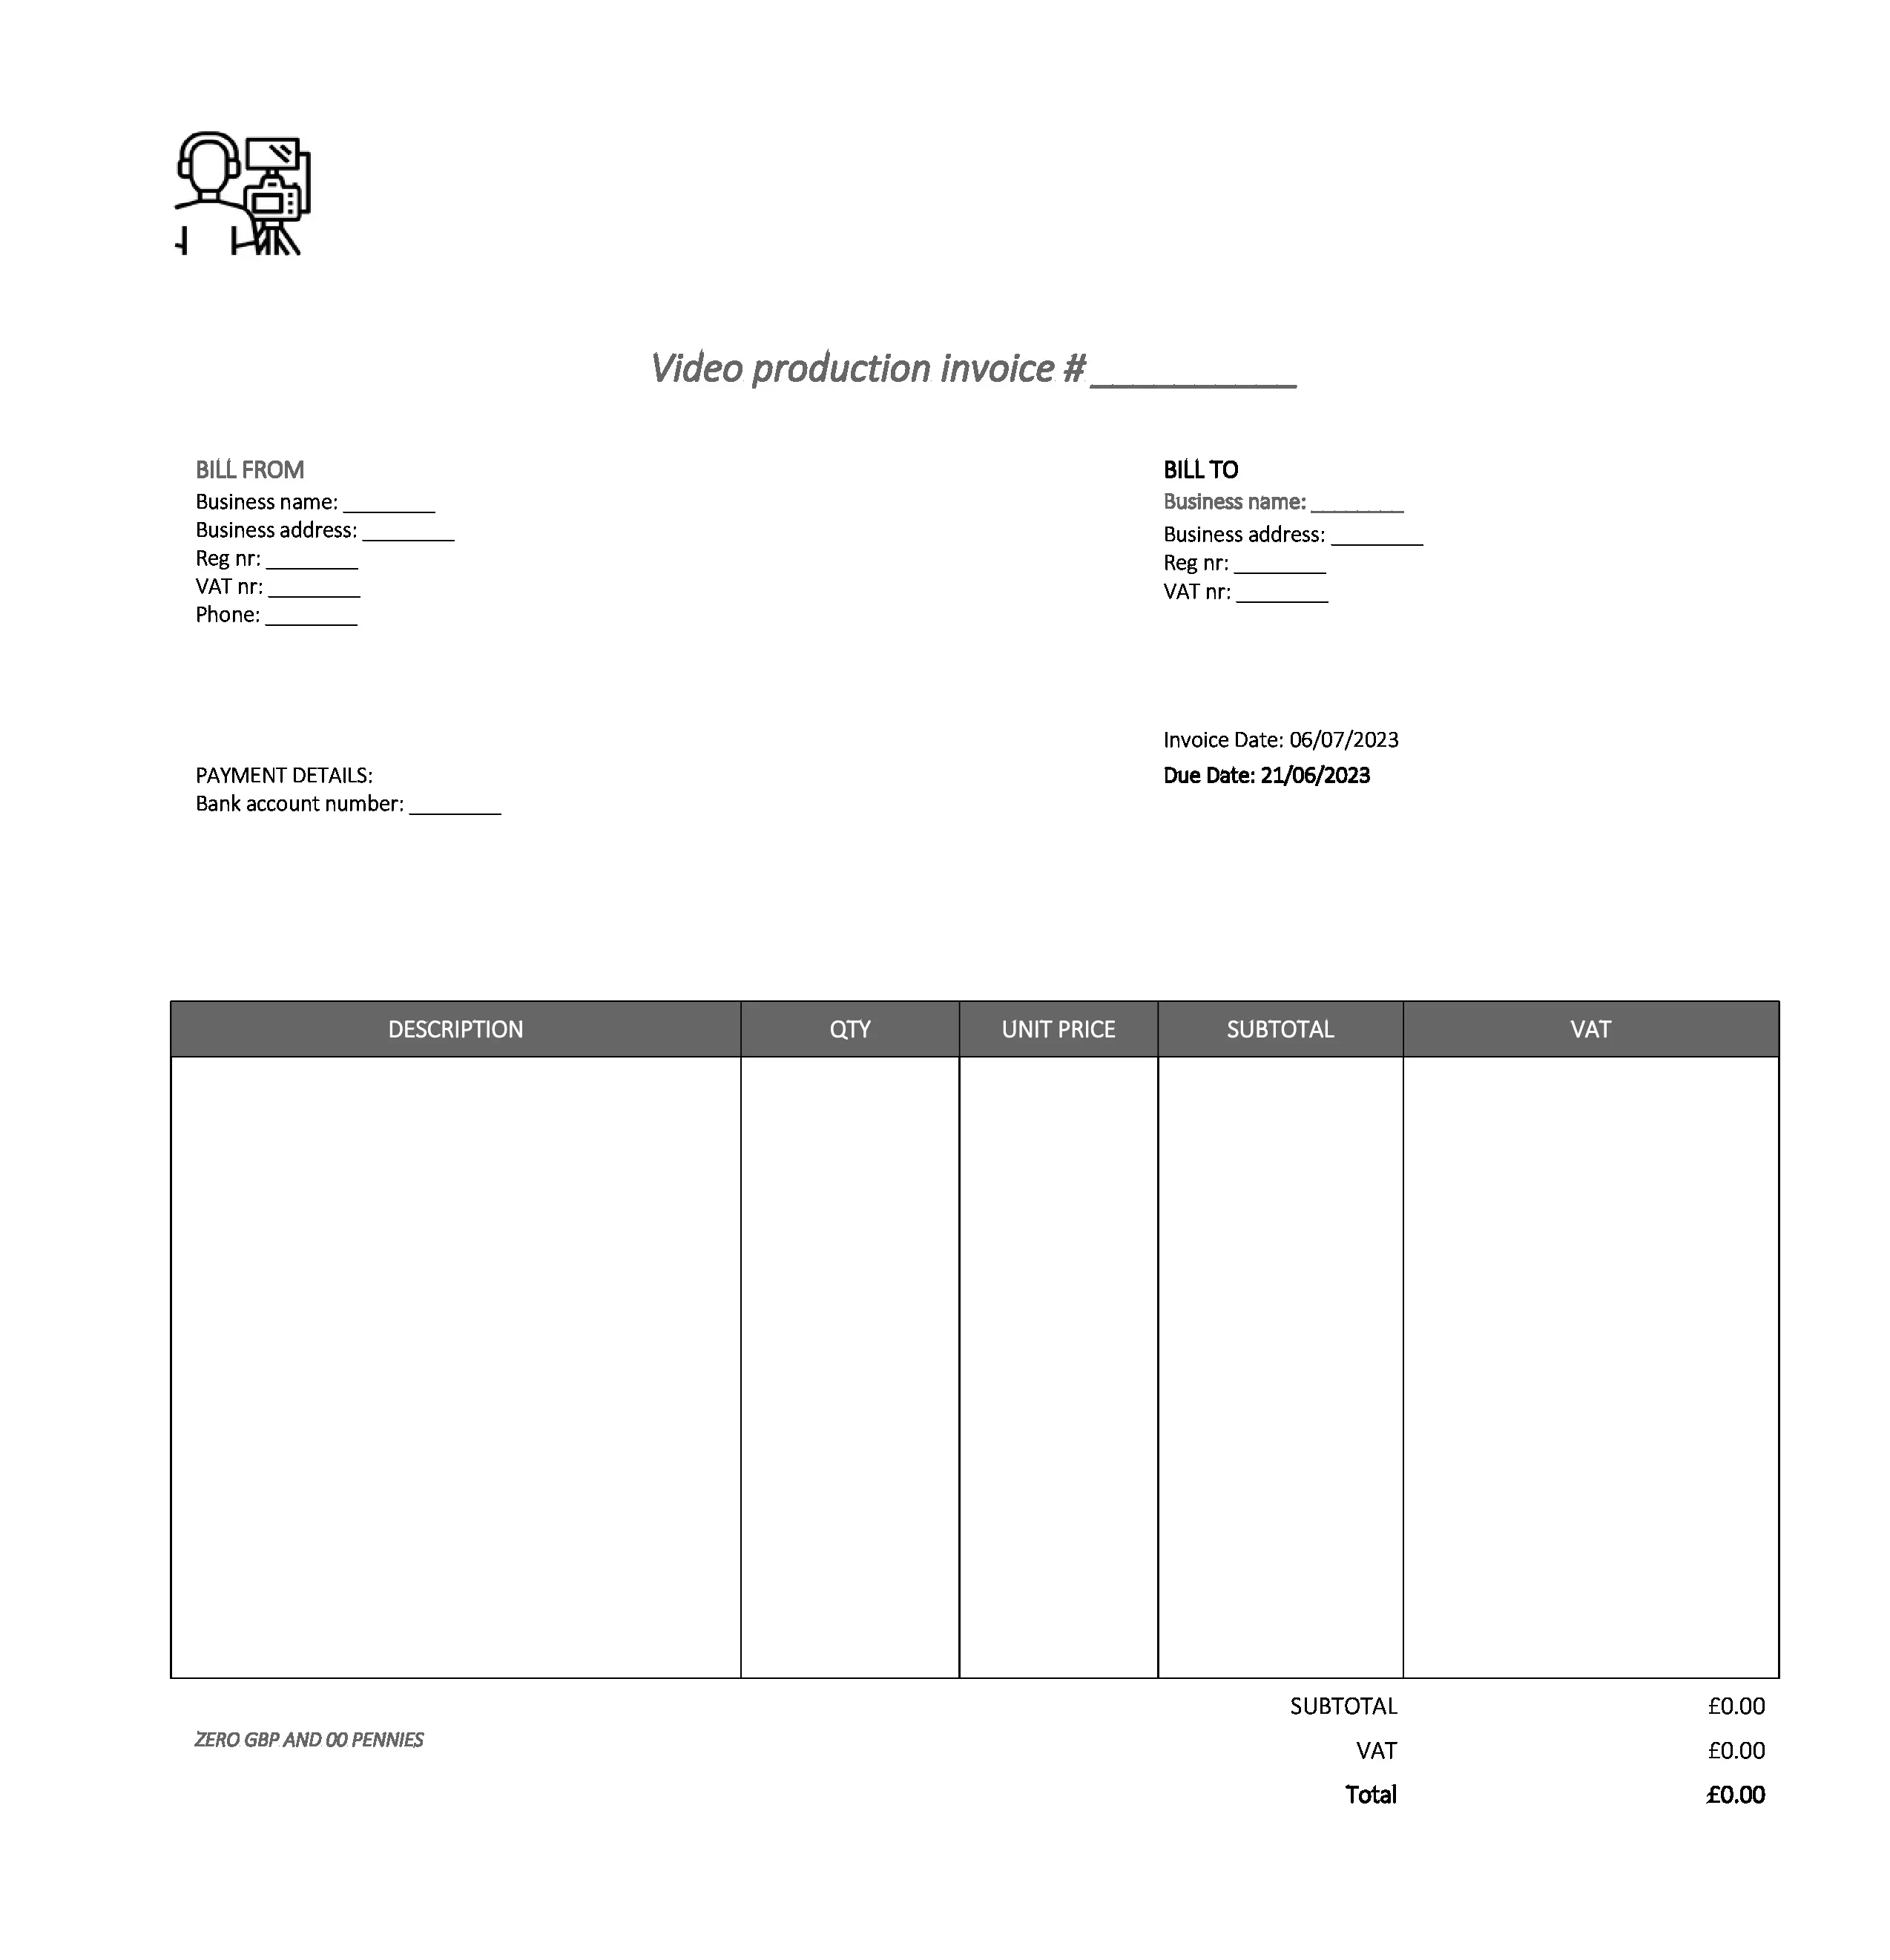 fancy video production invoice template UK Excel / Google sheets